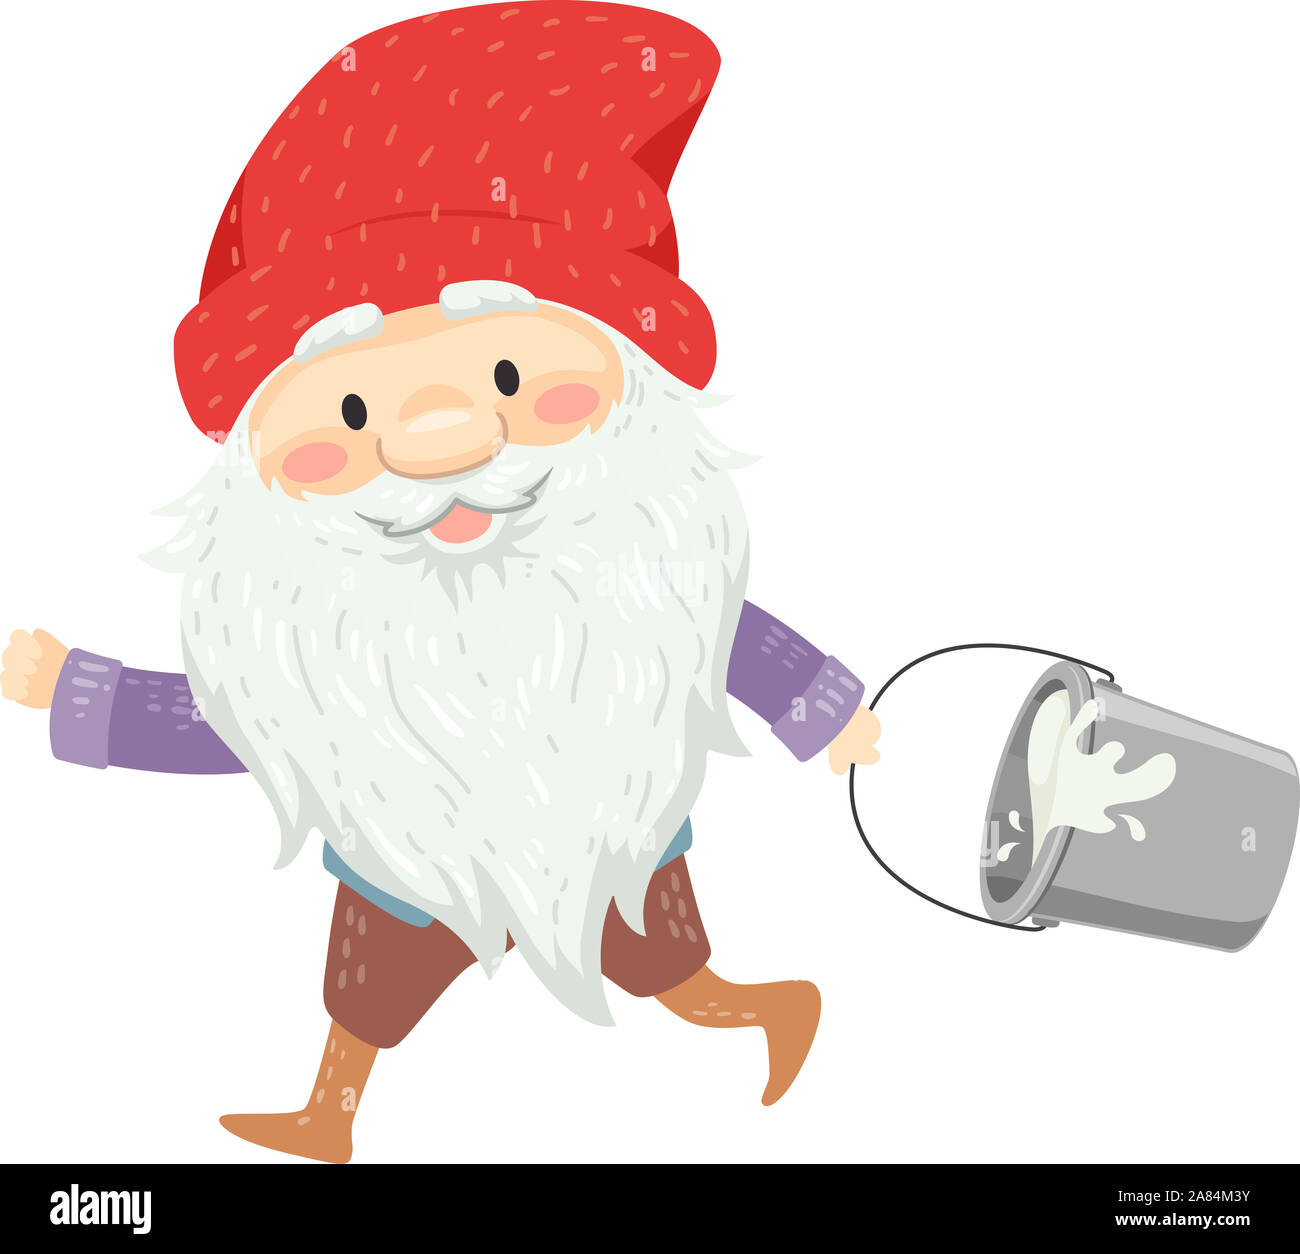 Illustration of an Icelandic Yule Lad with Long White Beard and Mustache Wearing Red Bonnet Carrying a Bucket of Milk from the Cowshed Stock Photo